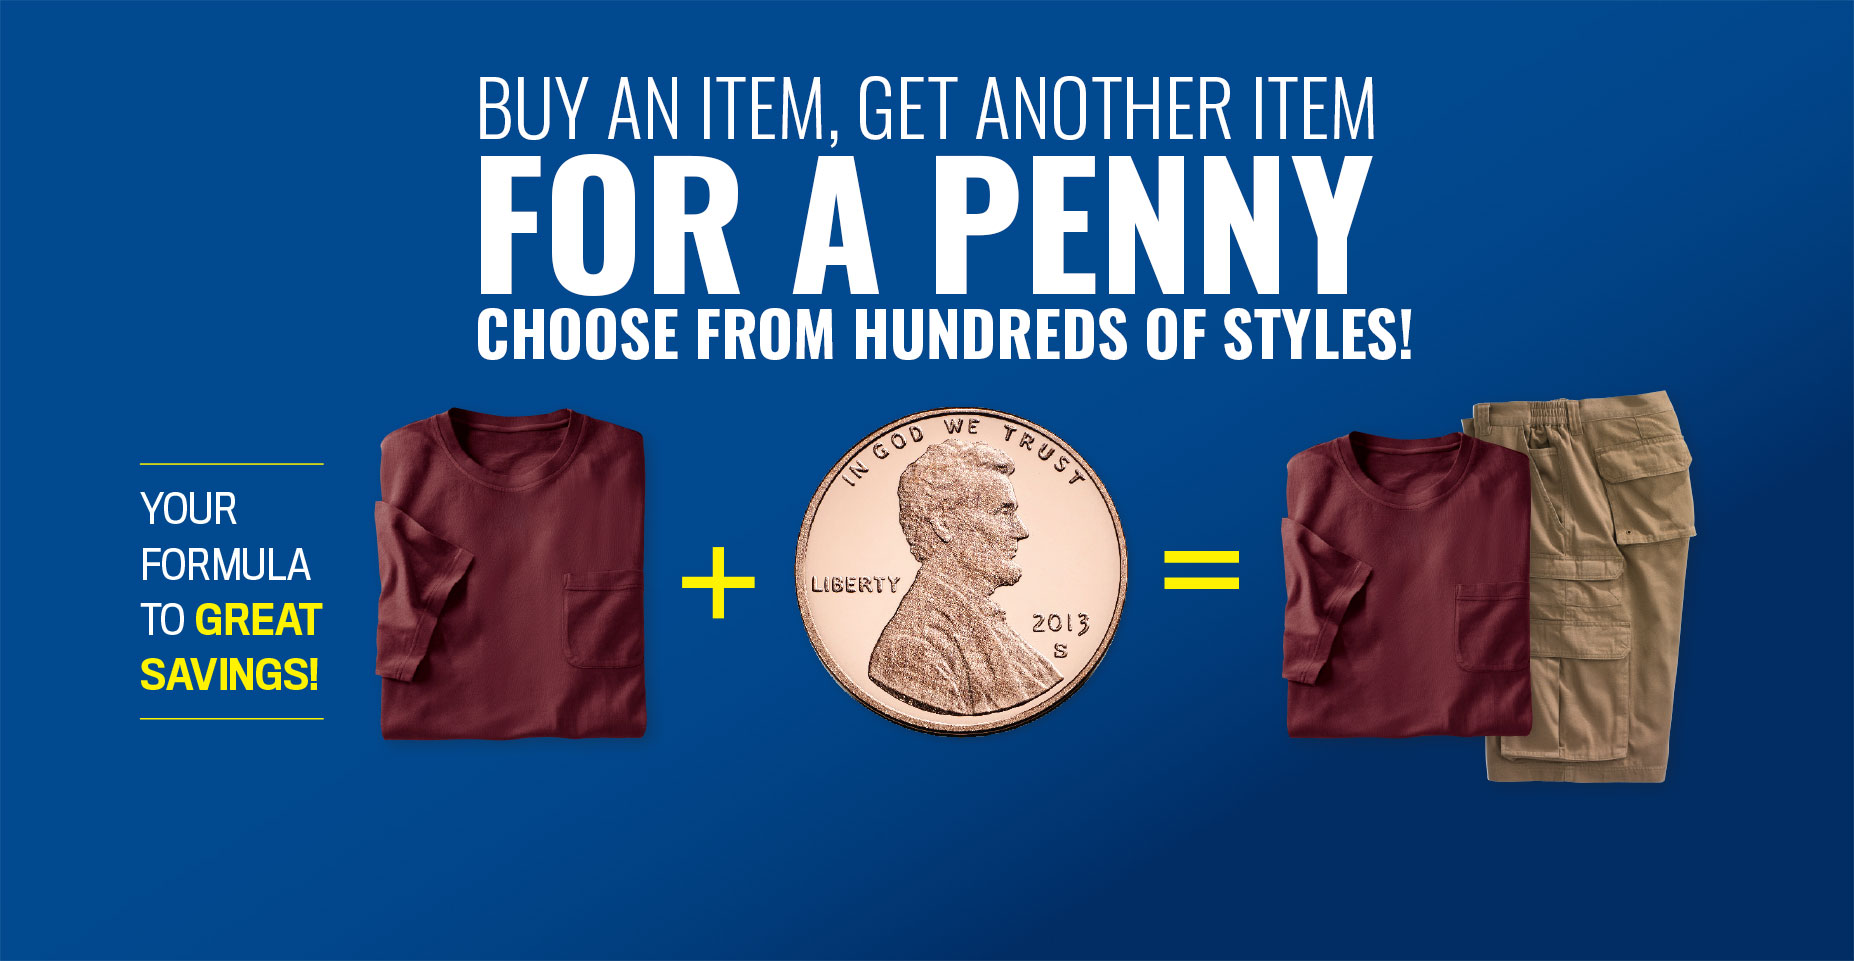 Buy an item, get another item for a penny choose from hundreds of styles